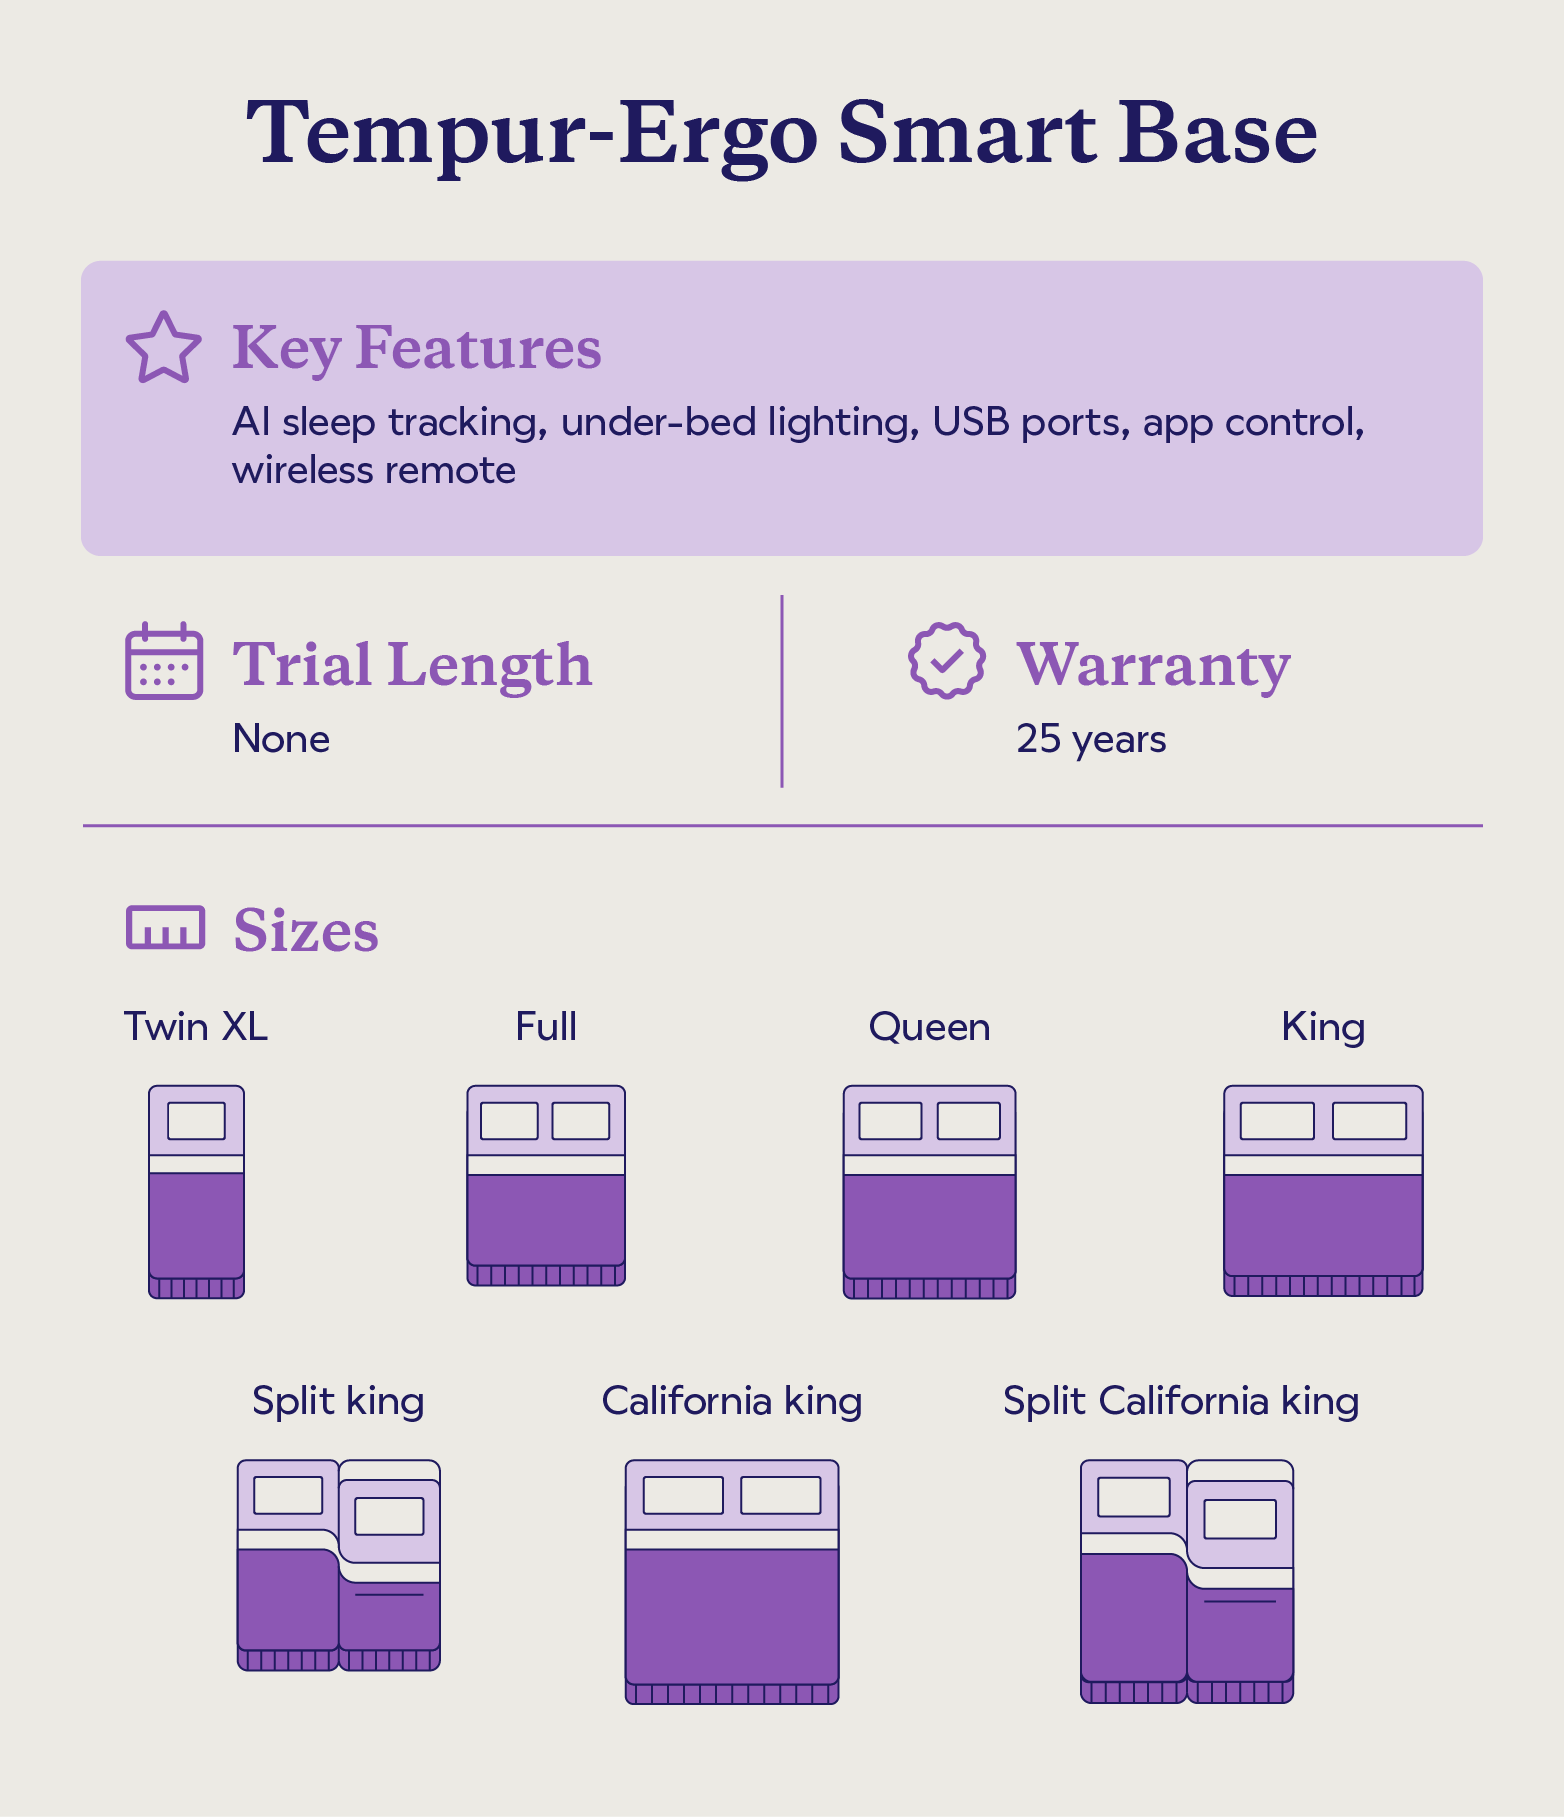 Key features and sizes of the Tempur-Ergo Smart Base.